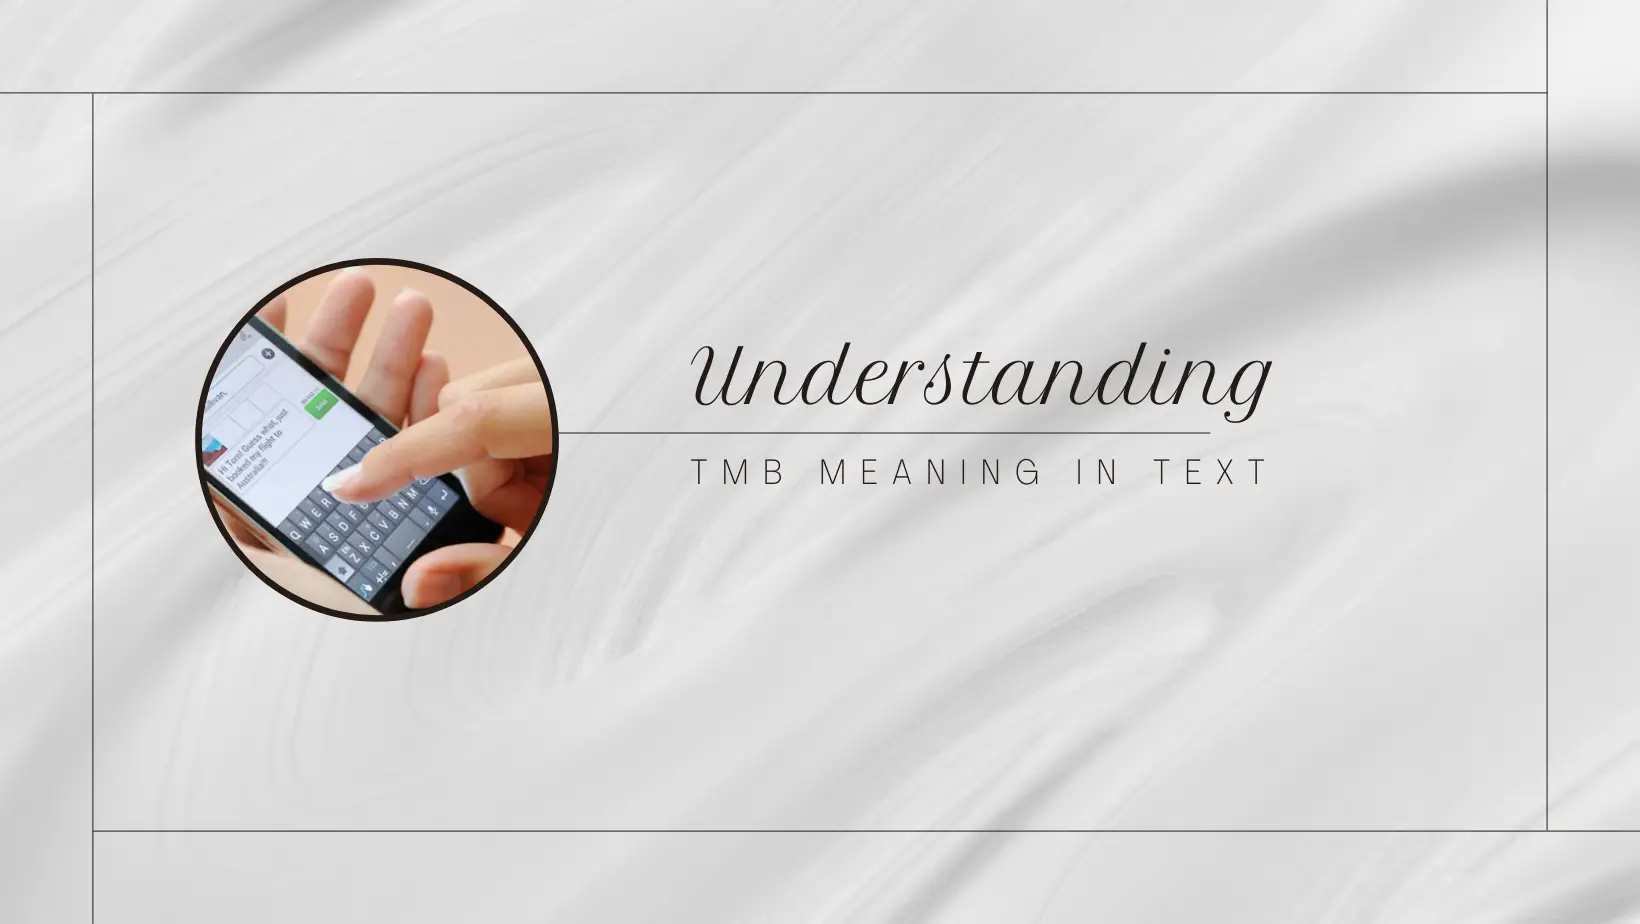 tmb meaning in text